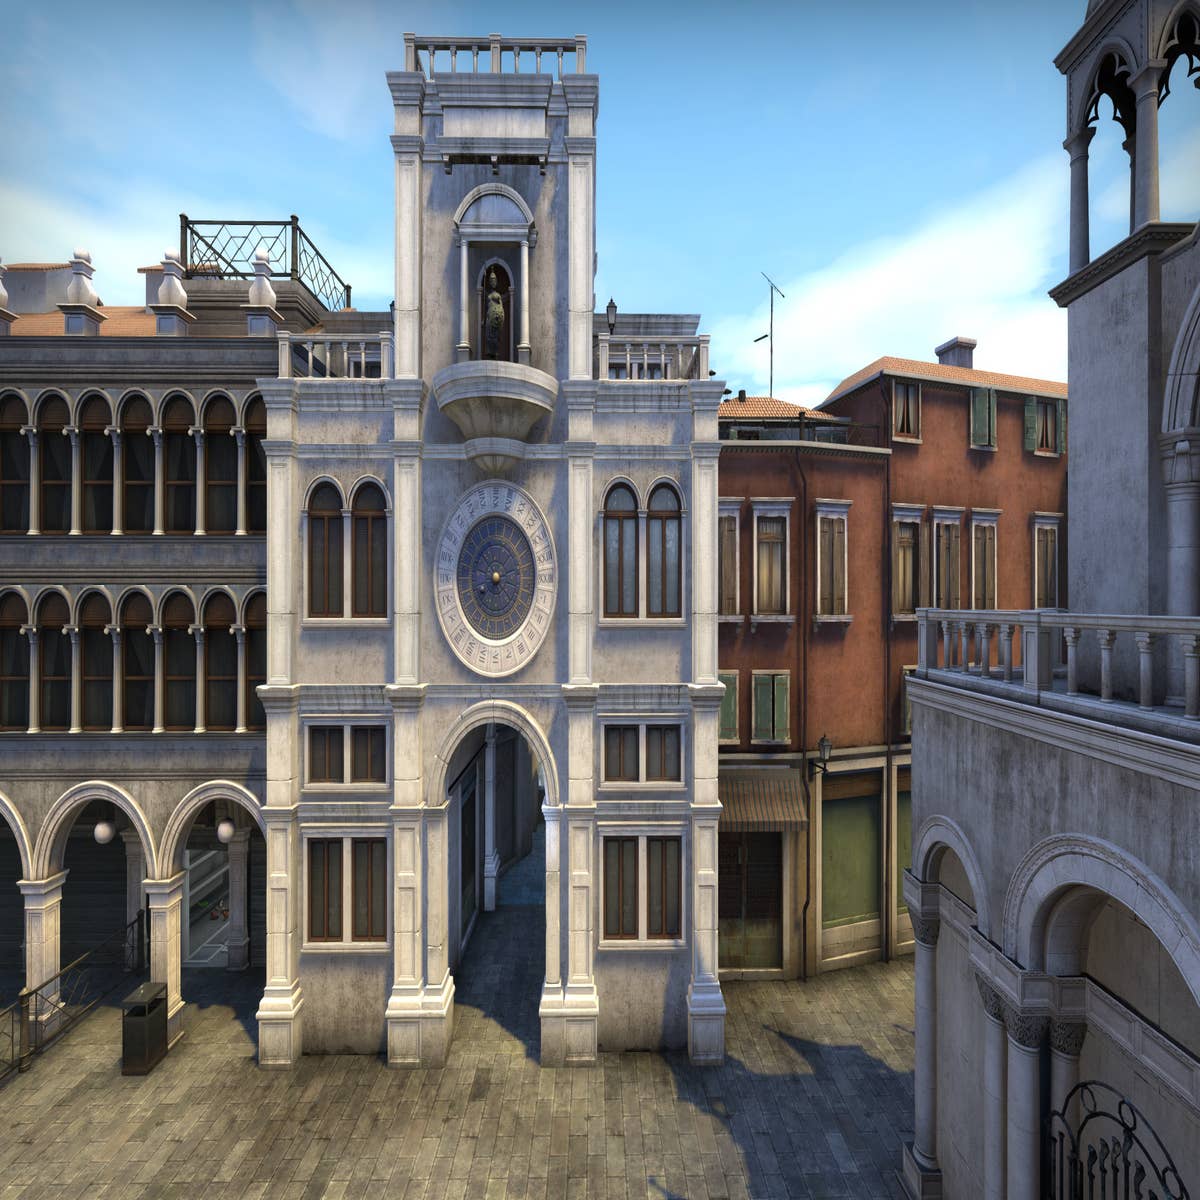 Counter-Strike: Global Offensive updated with a new map and updated  terrorist model